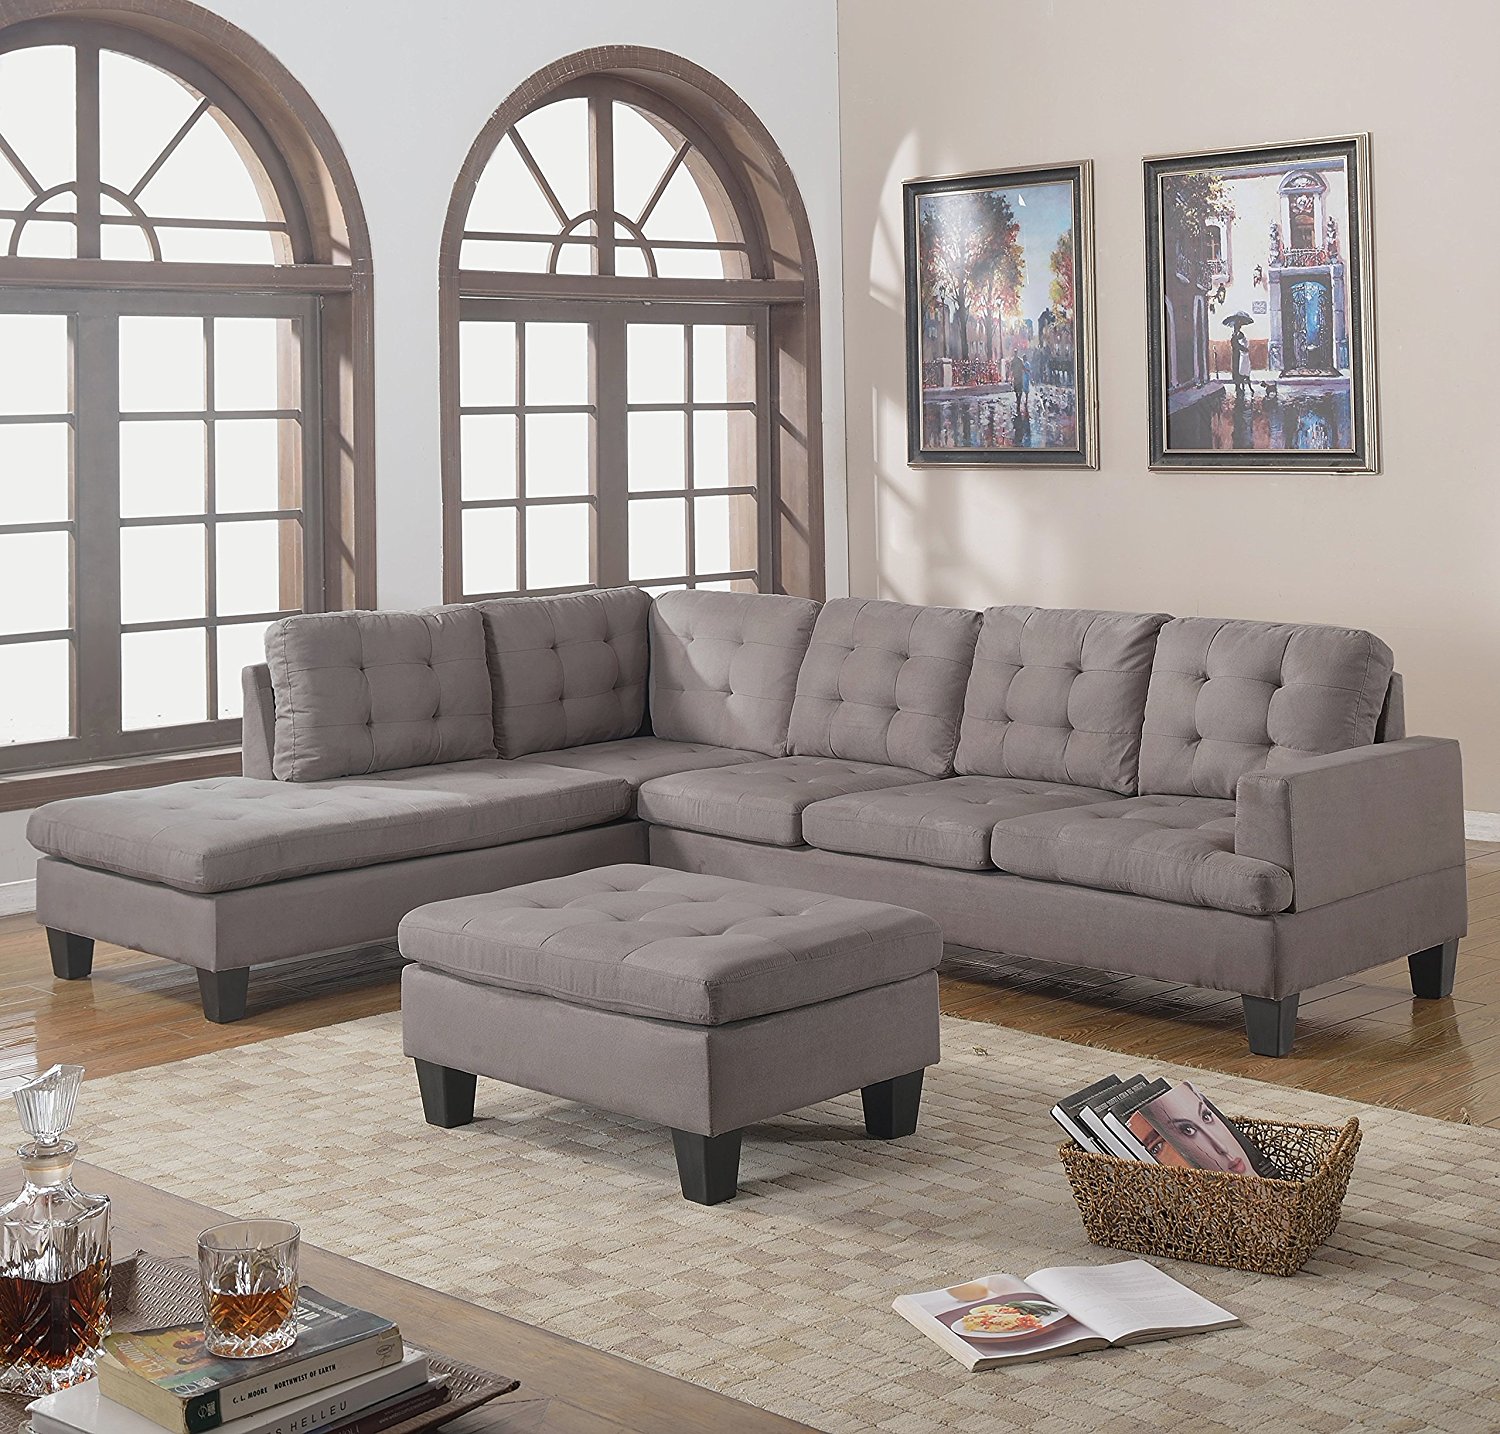 Divano Roma Furniture 3-Piece Reversible Chaise Sectional Sofa with Ottoman, Grey Charcoal